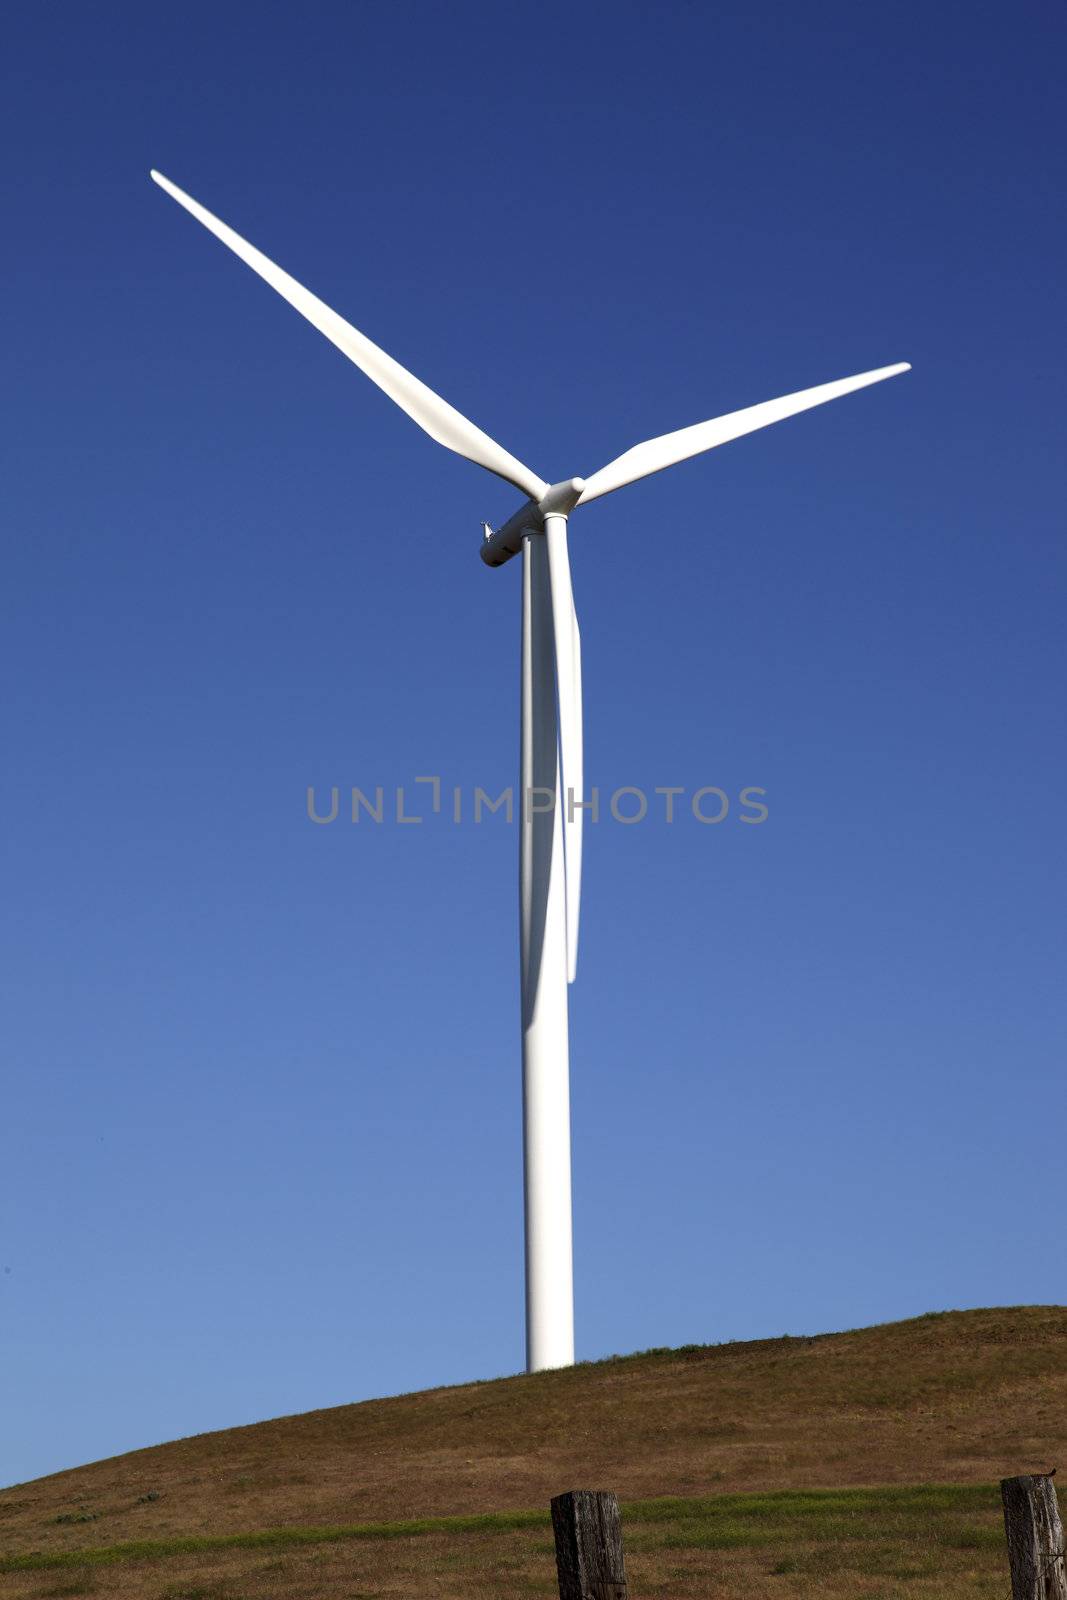 Wind turbine rotating through the air and generating power, WA., state.